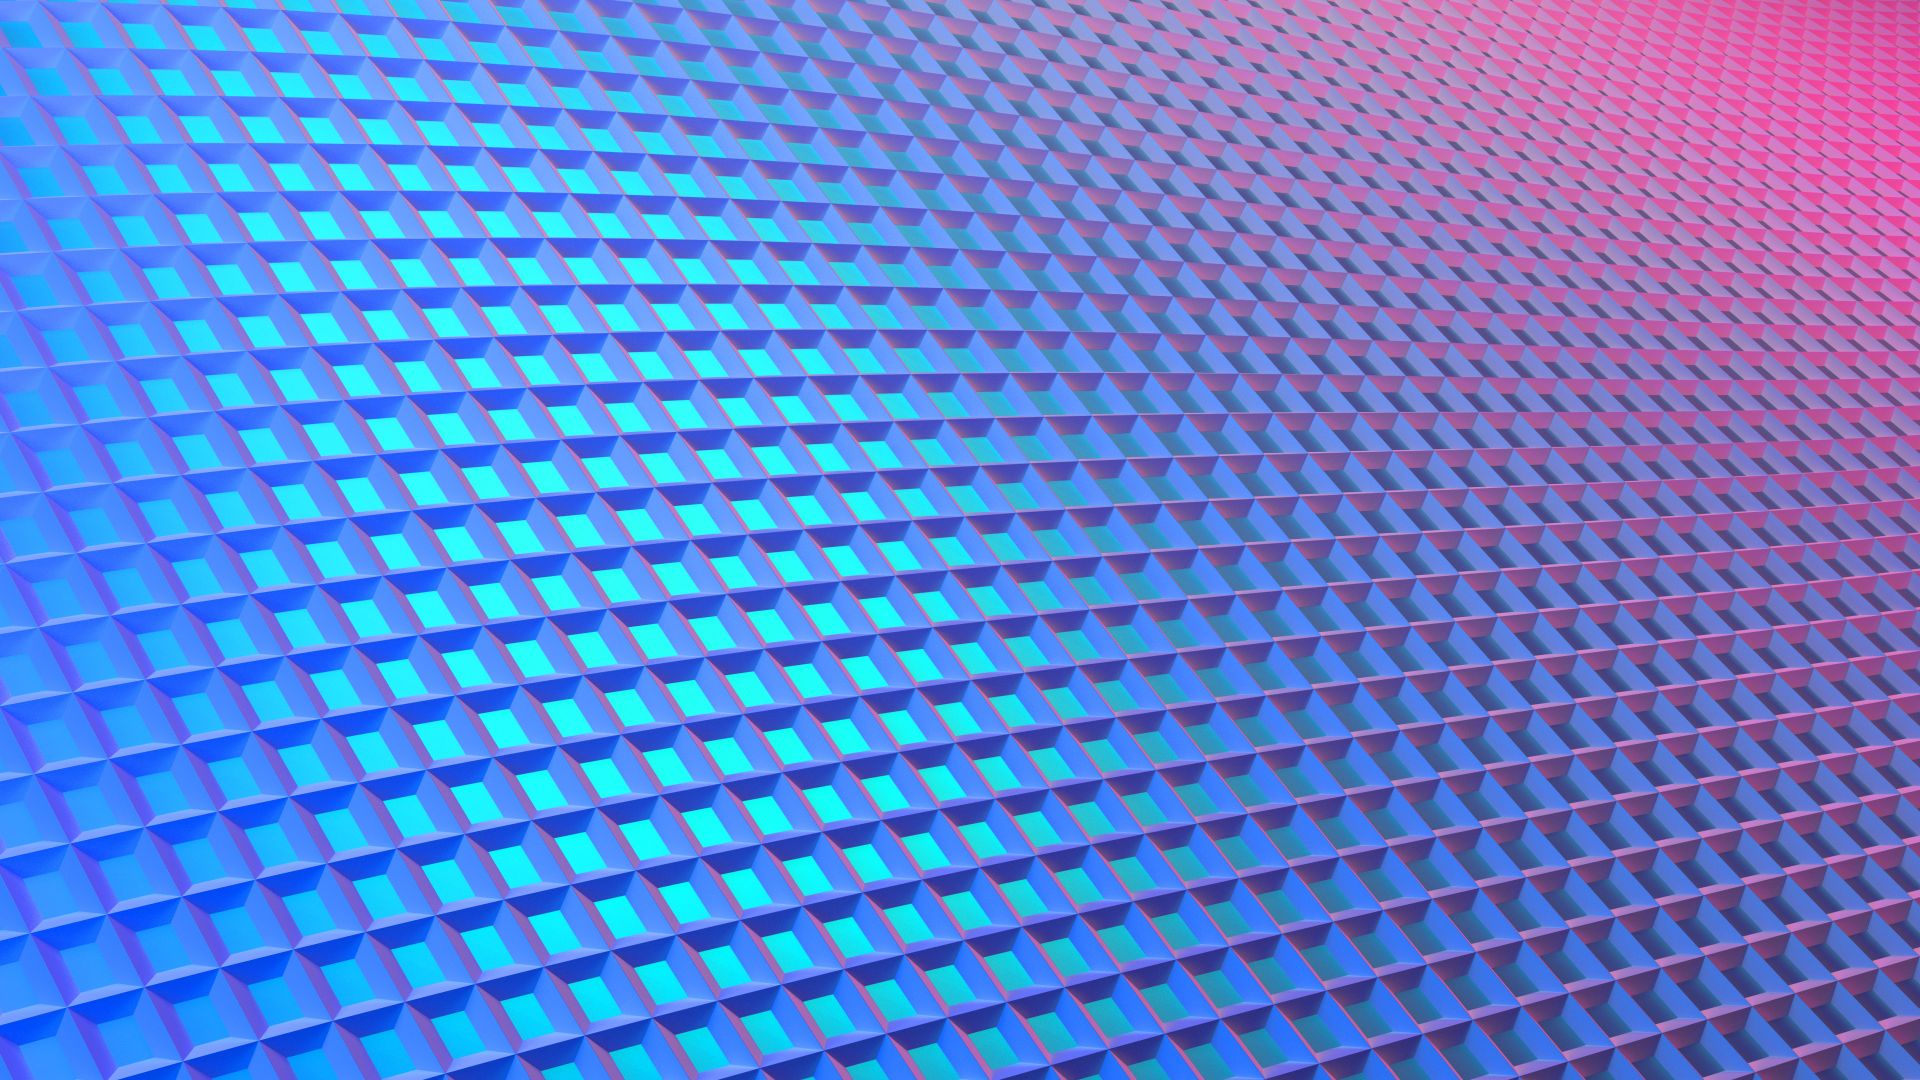 iphone wallpaper, android wallpaper, 4k, 5k, grids, abstract, blue (horizontal)